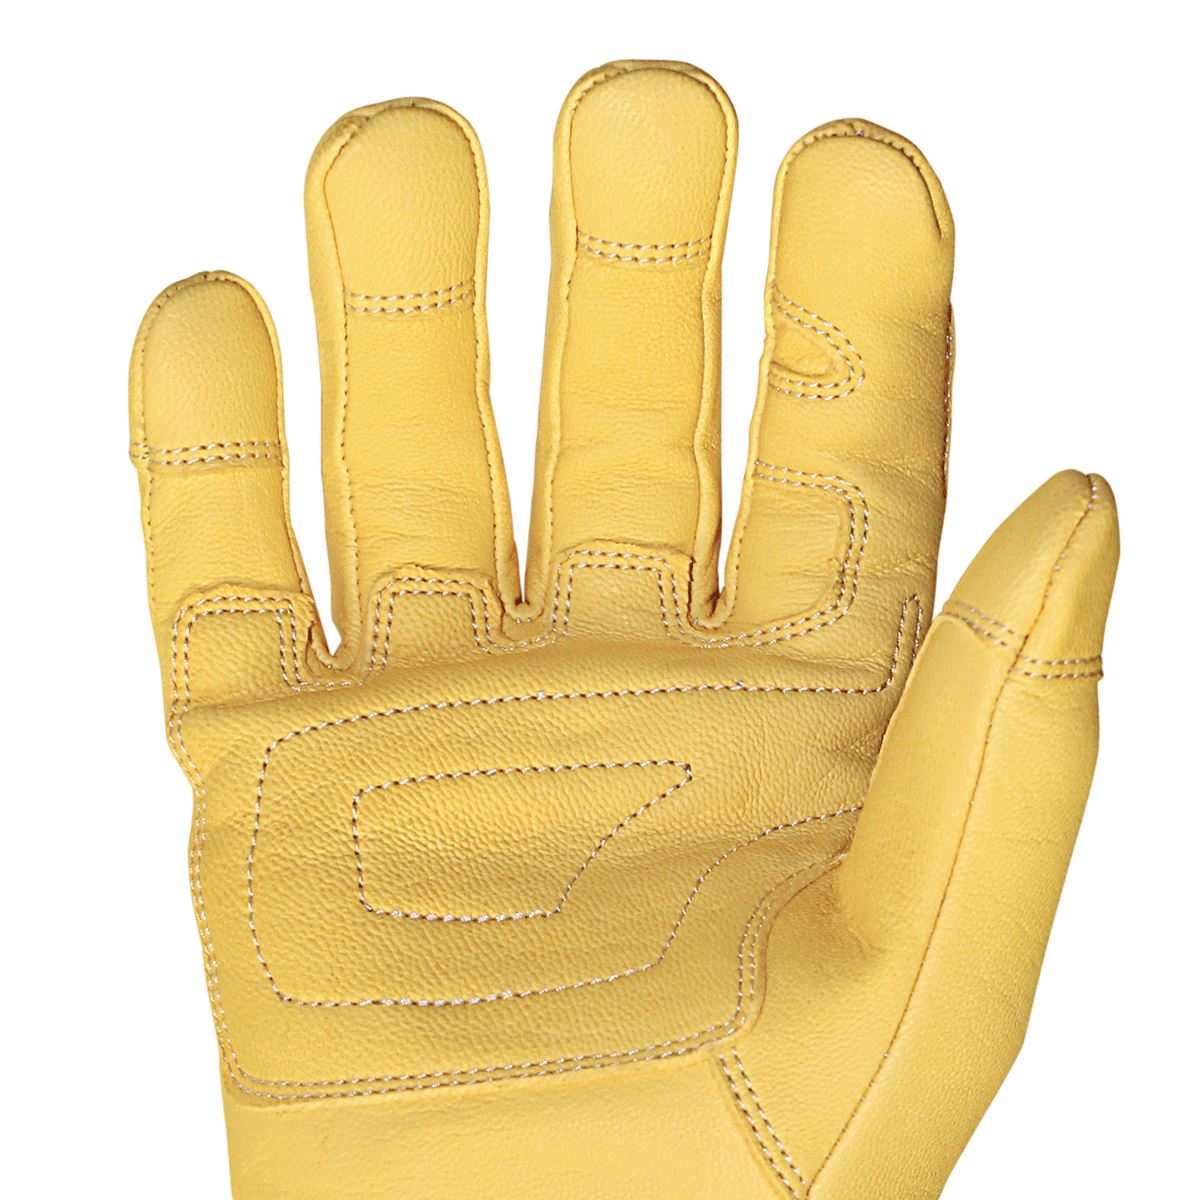 YOUNGSTOWN GLOVES 05-3080-70 General Utility Work Gloves